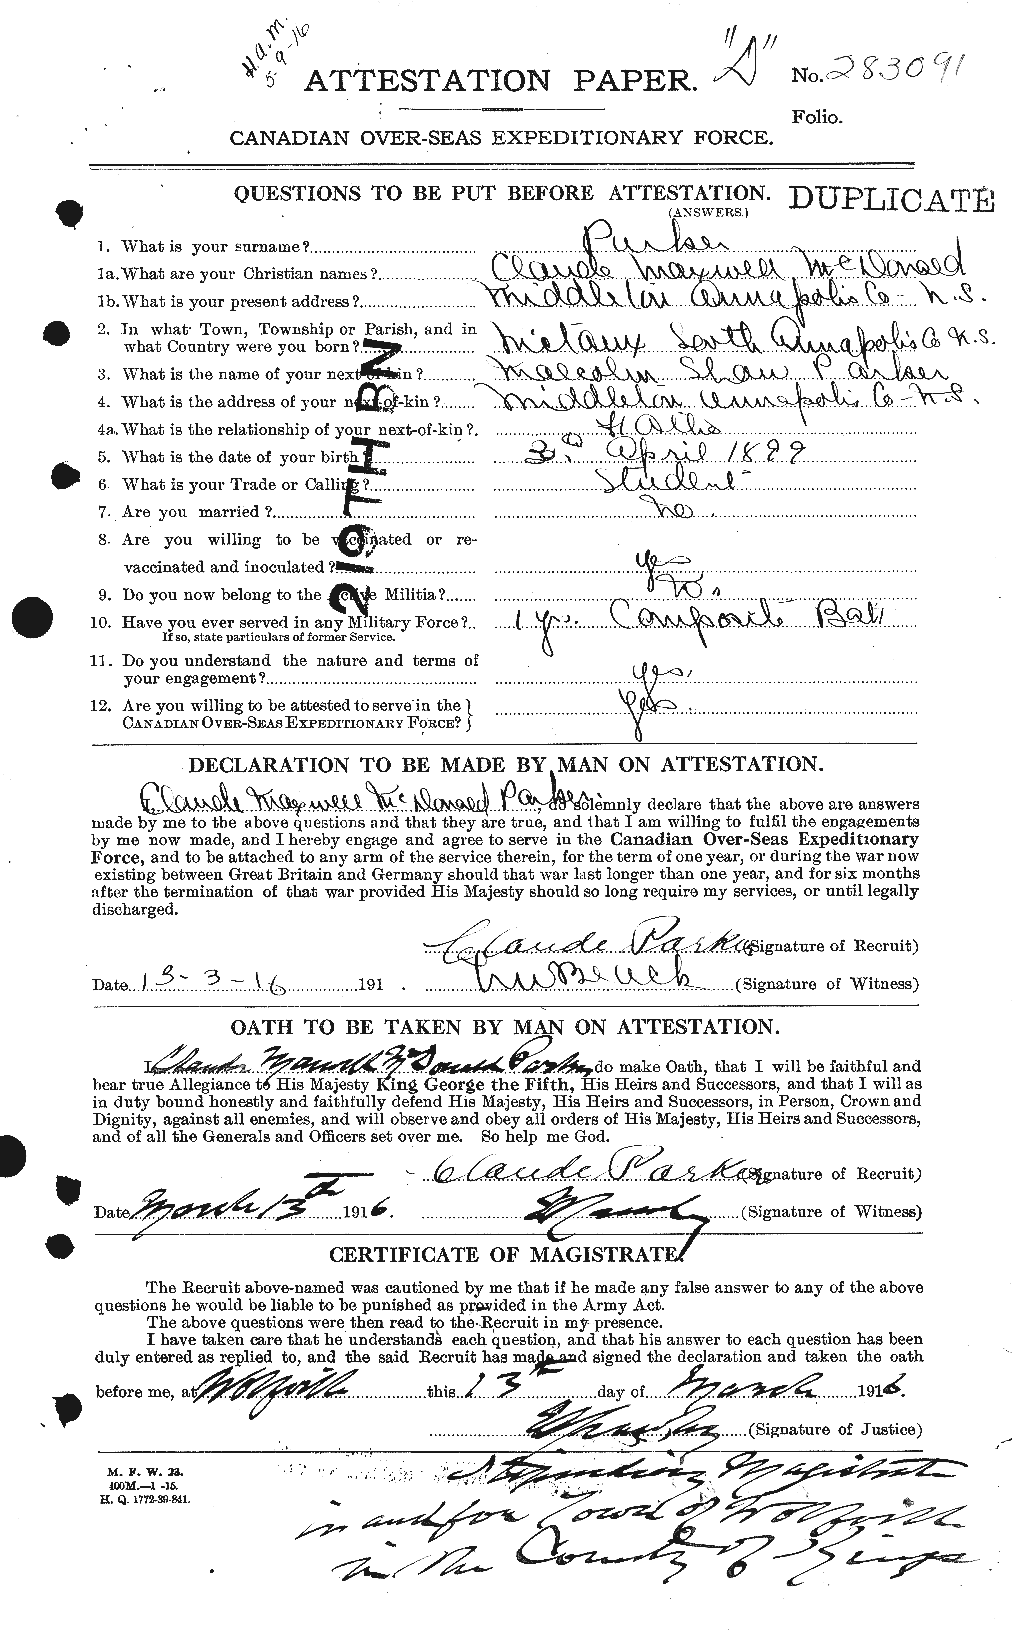 Personnel Records of the First World War - CEF 565089a